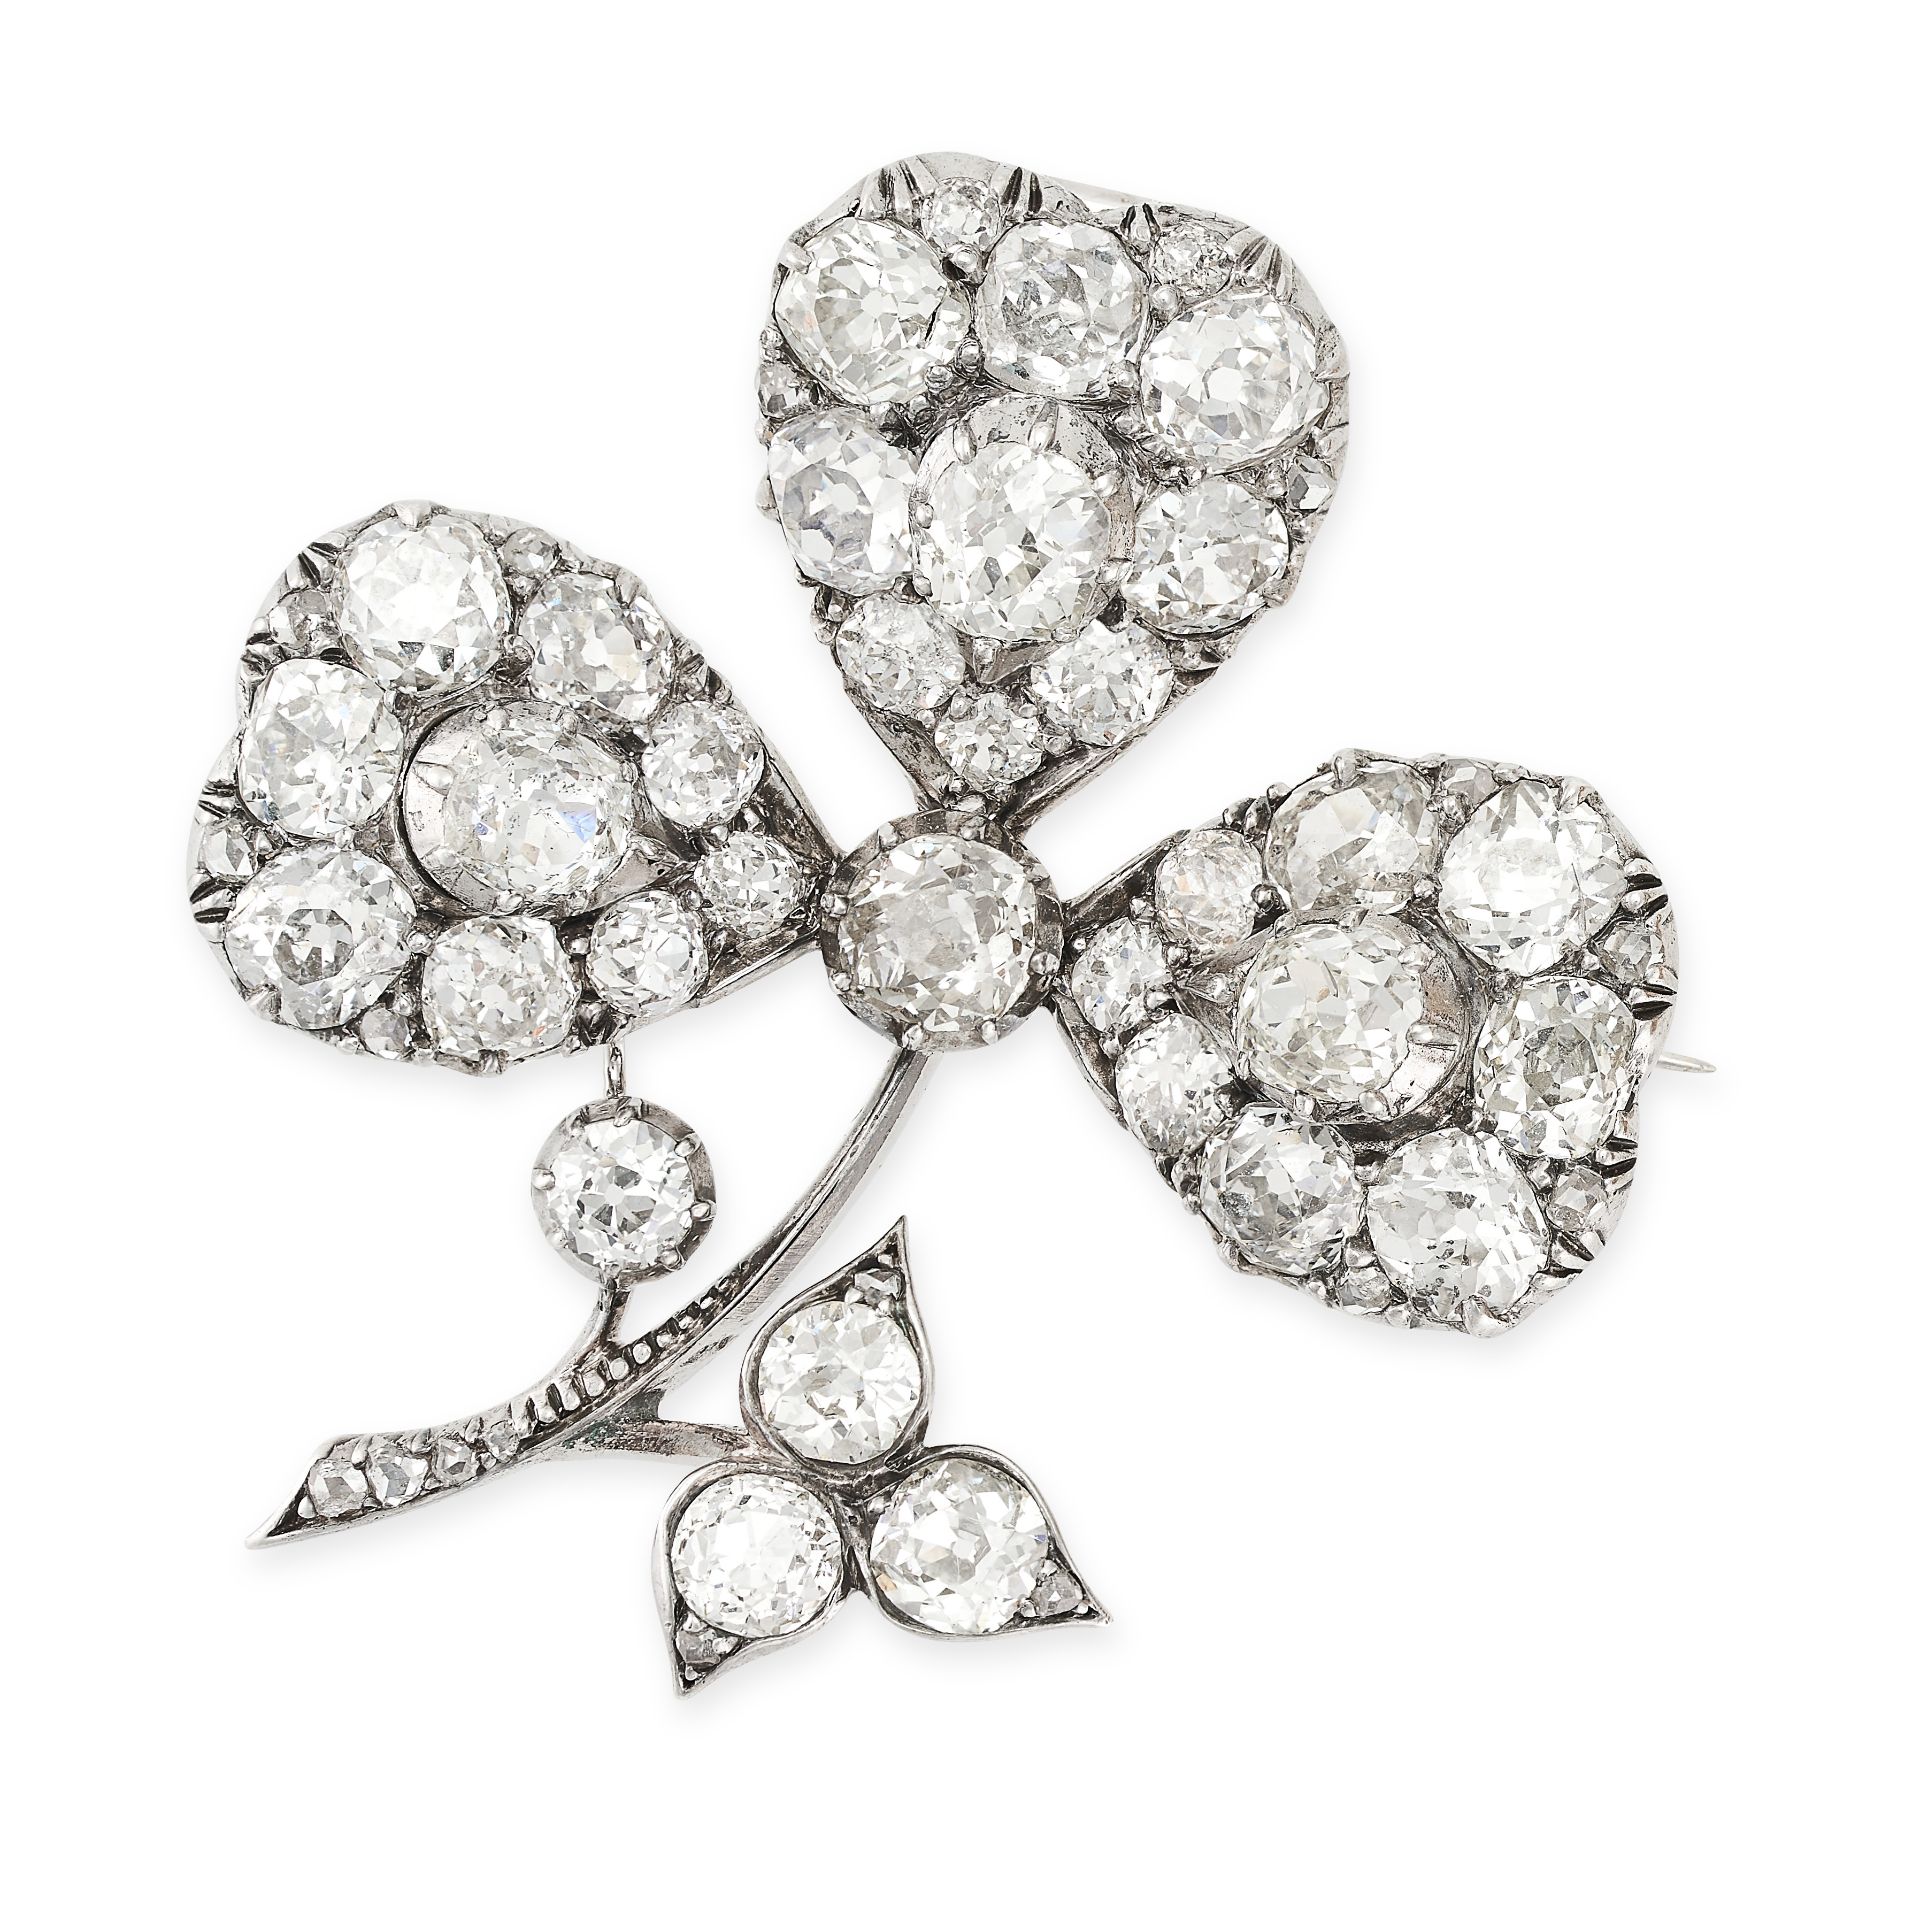 A FINE ANTIQUE VICTORIAN DIAMOND CLOVER BROOCH in white gold and silver, designed as a three leaf